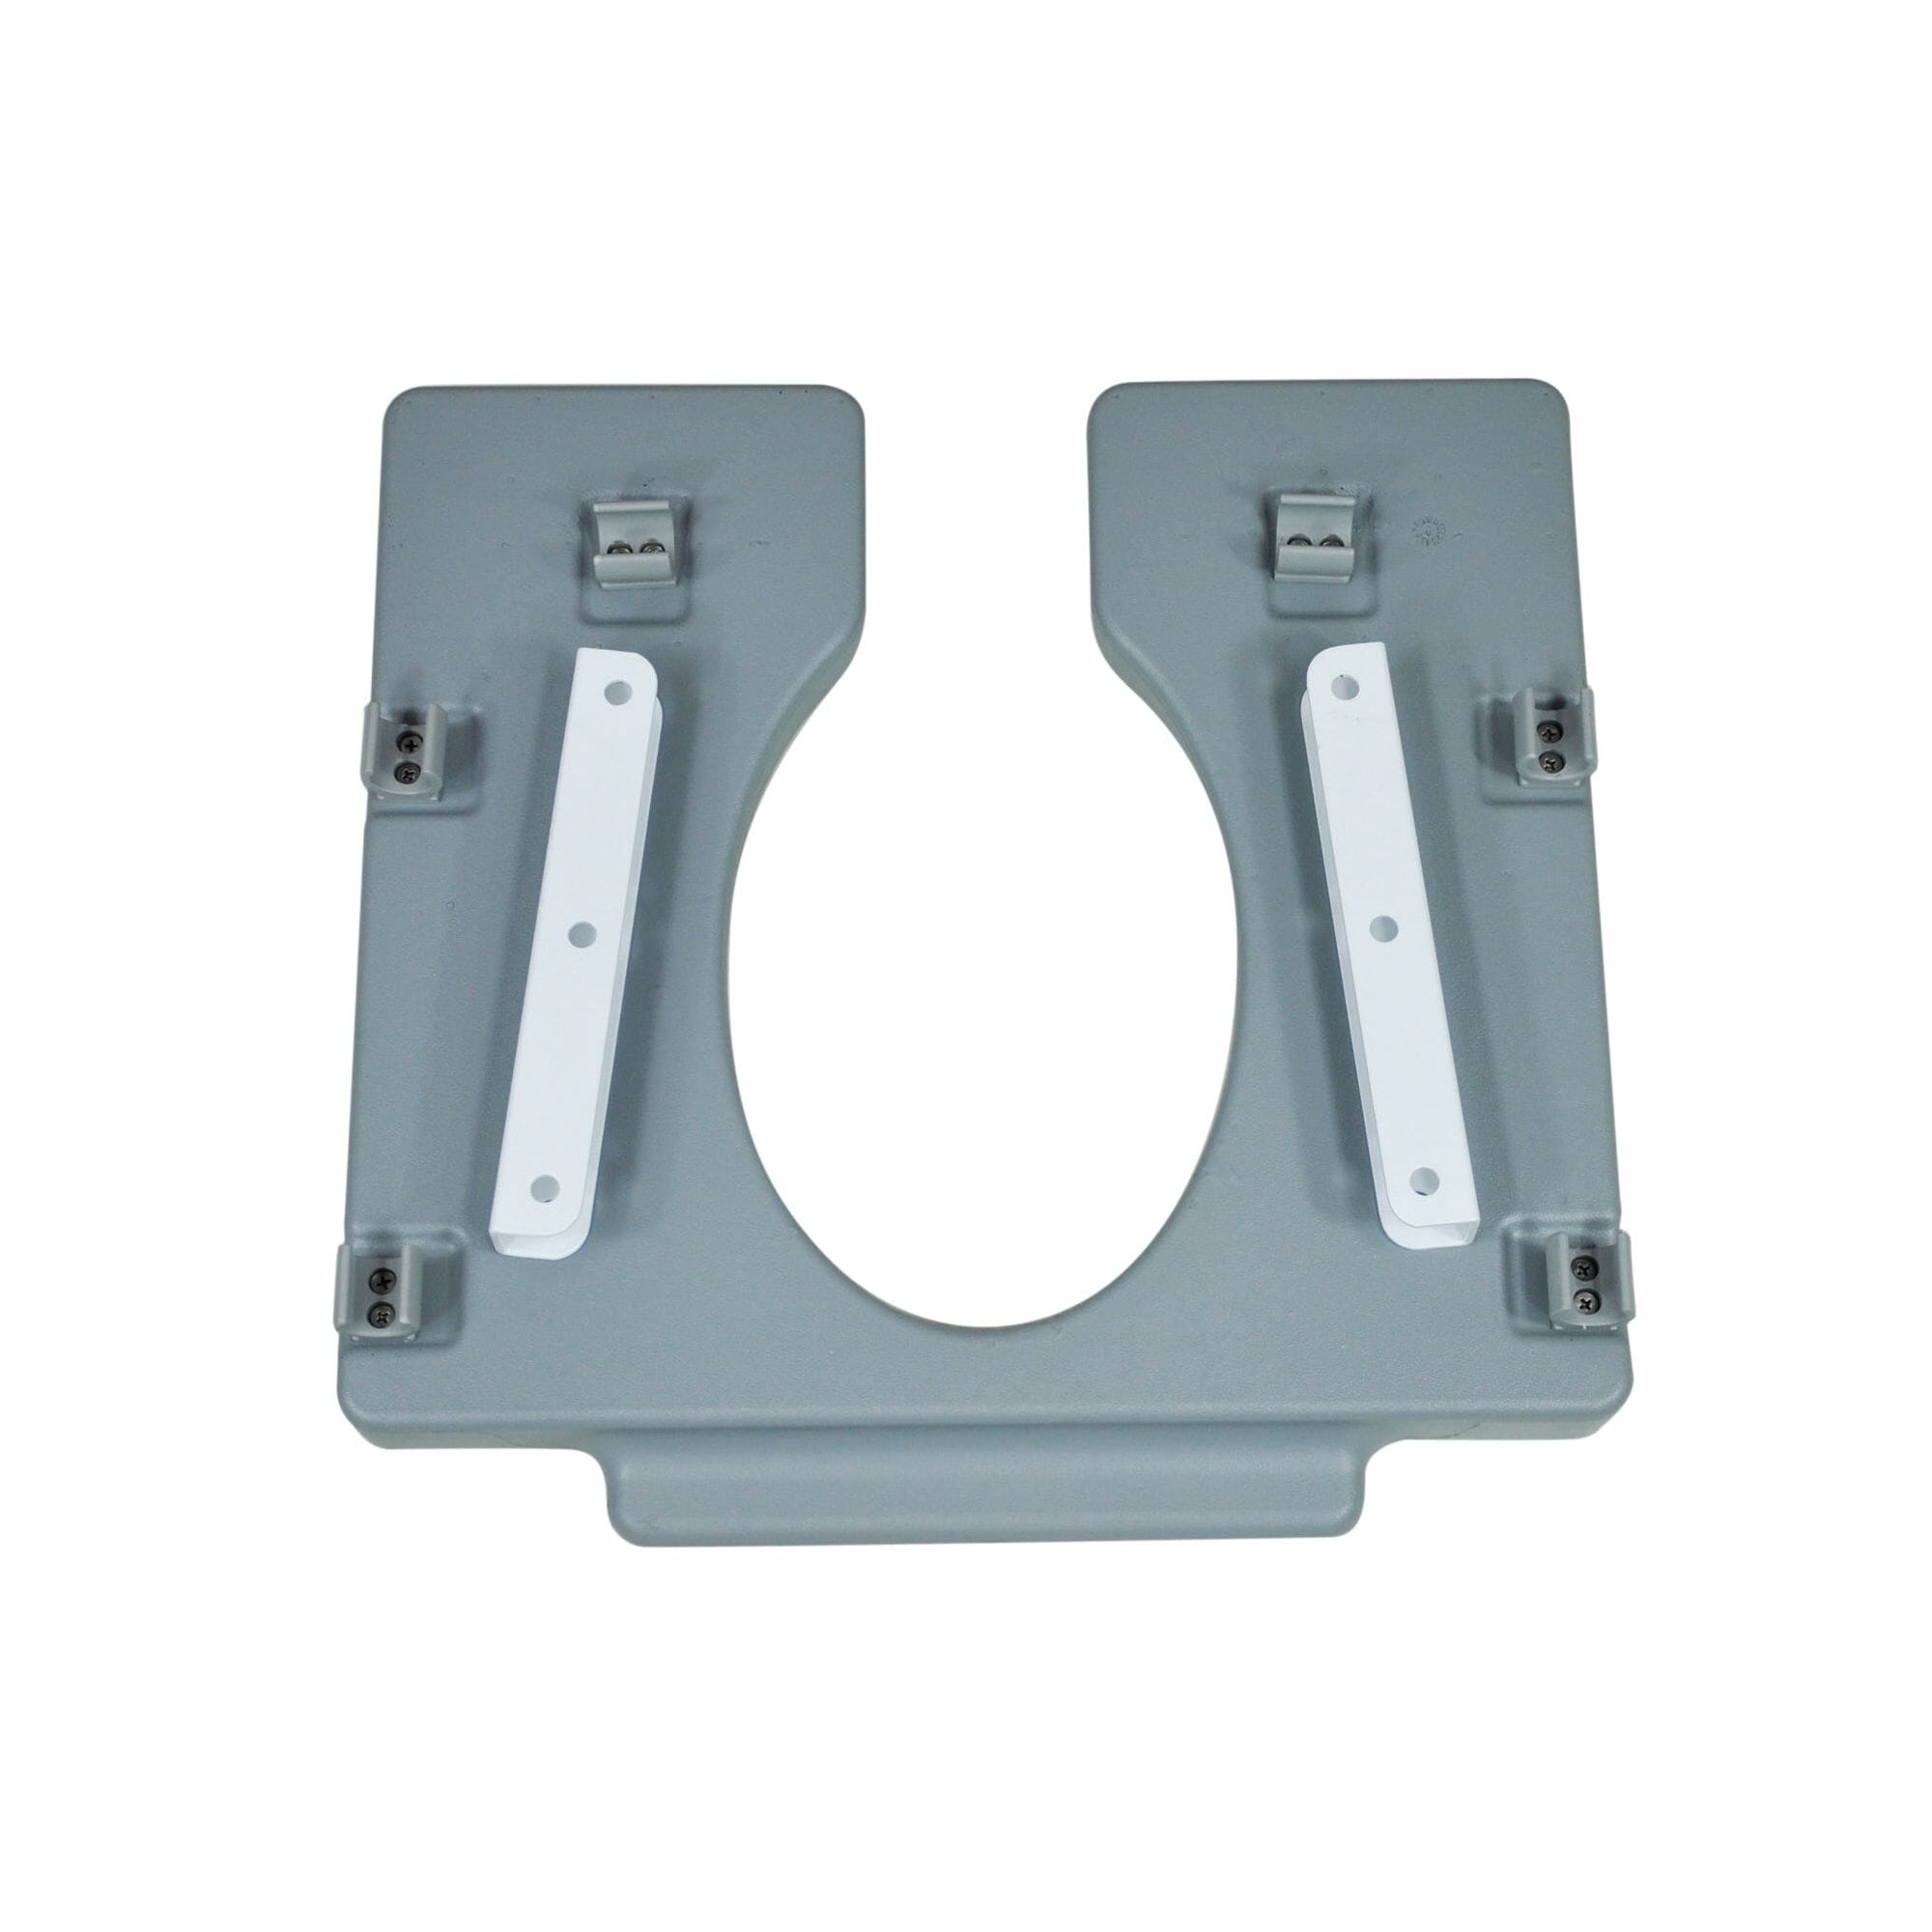 View Replacement Horseshoe Seat for Bewl Shower Chairs information